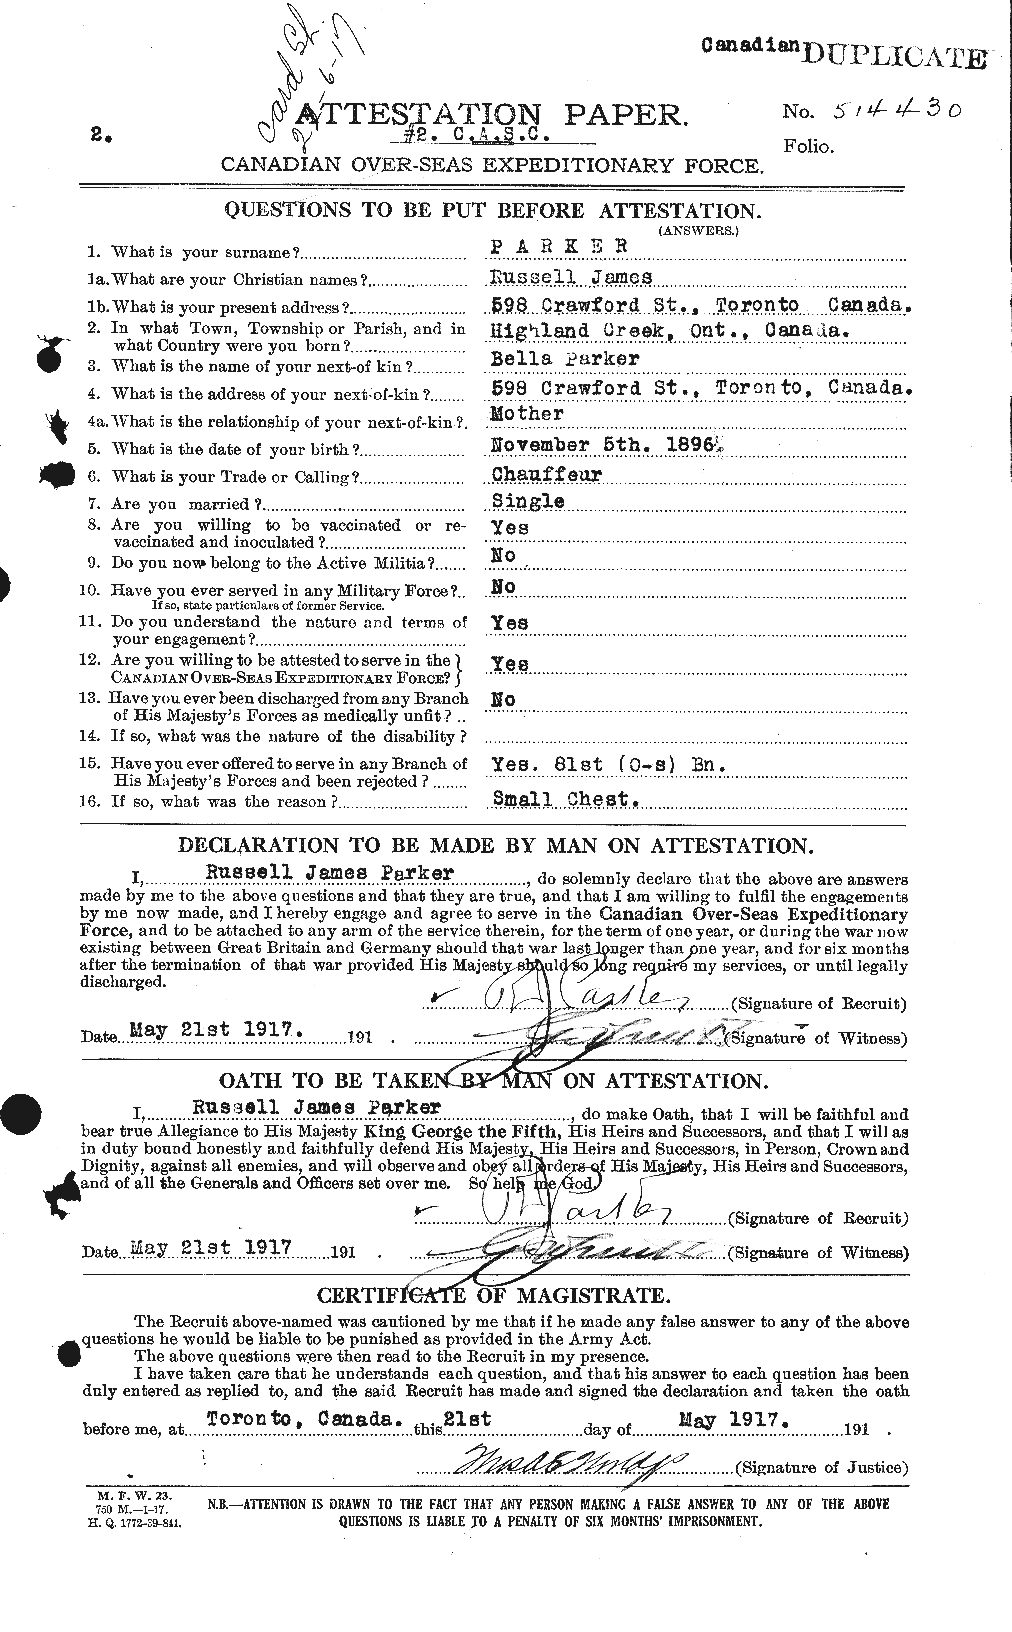 Personnel Records of the First World War - CEF 565618a